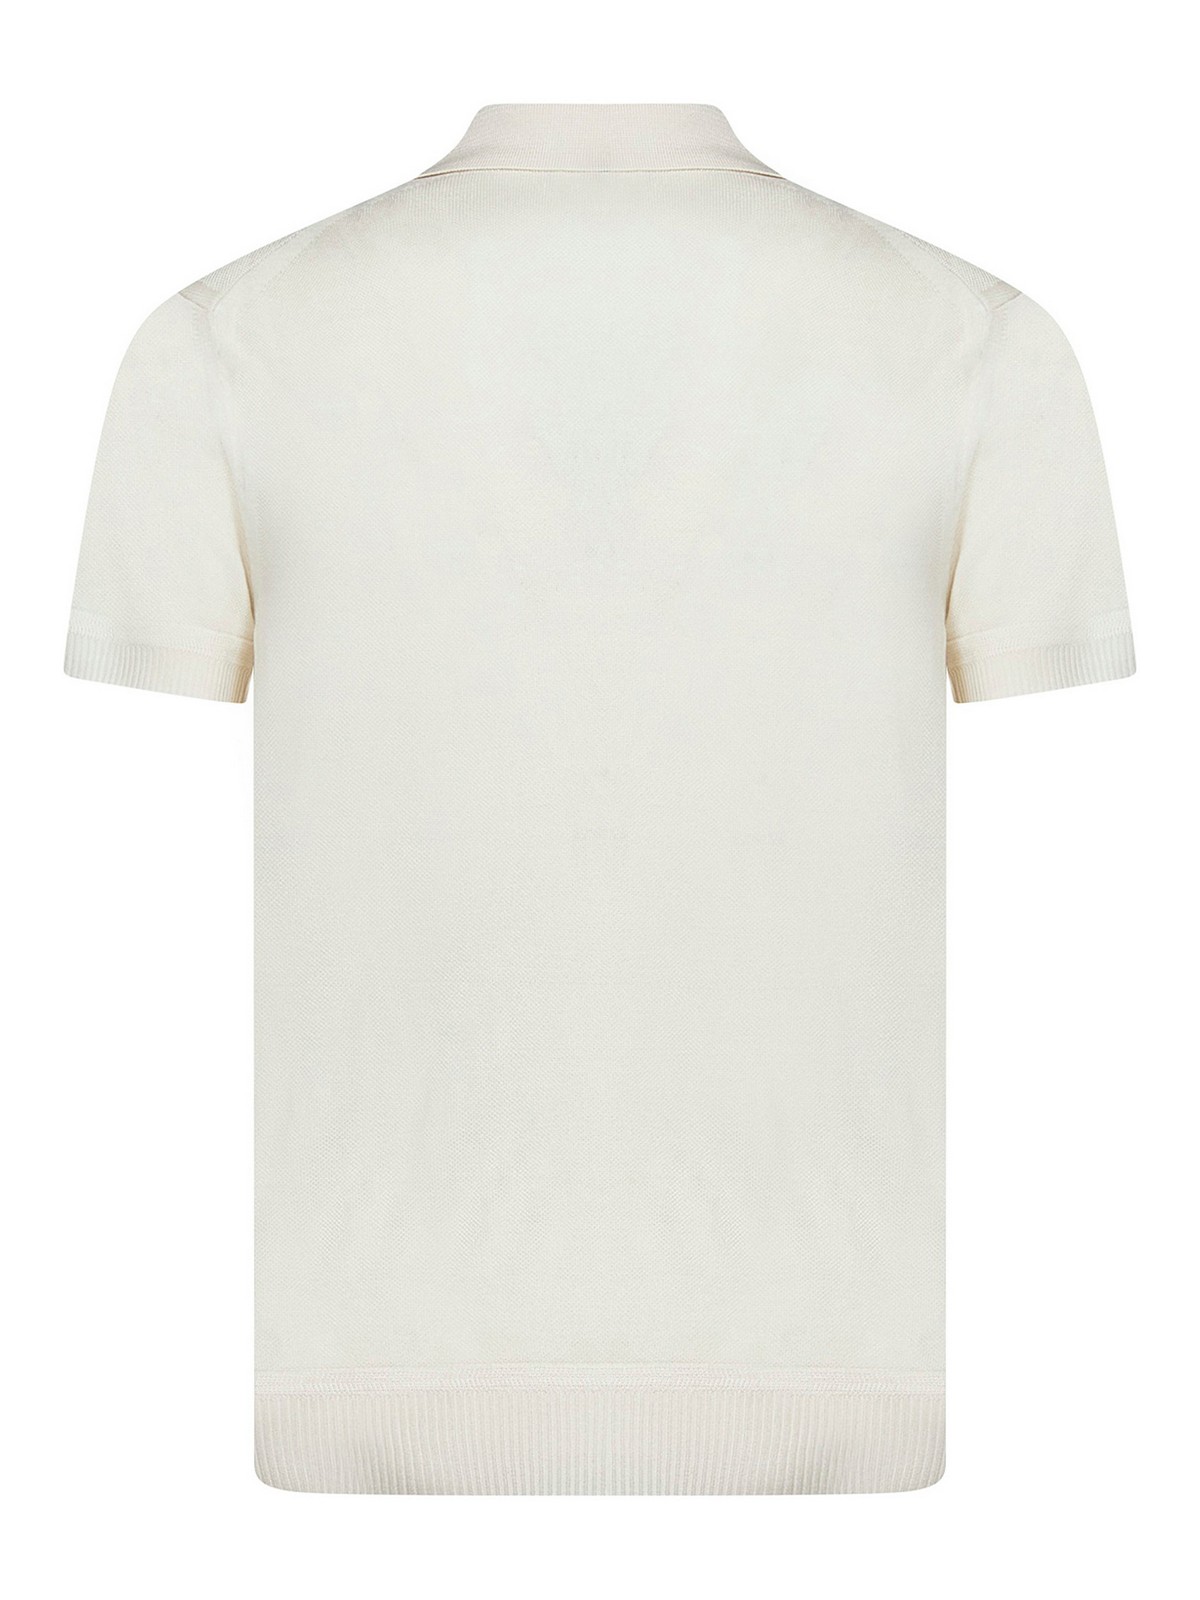 Shop Tom Ford Ribbed Finishes Polo In White